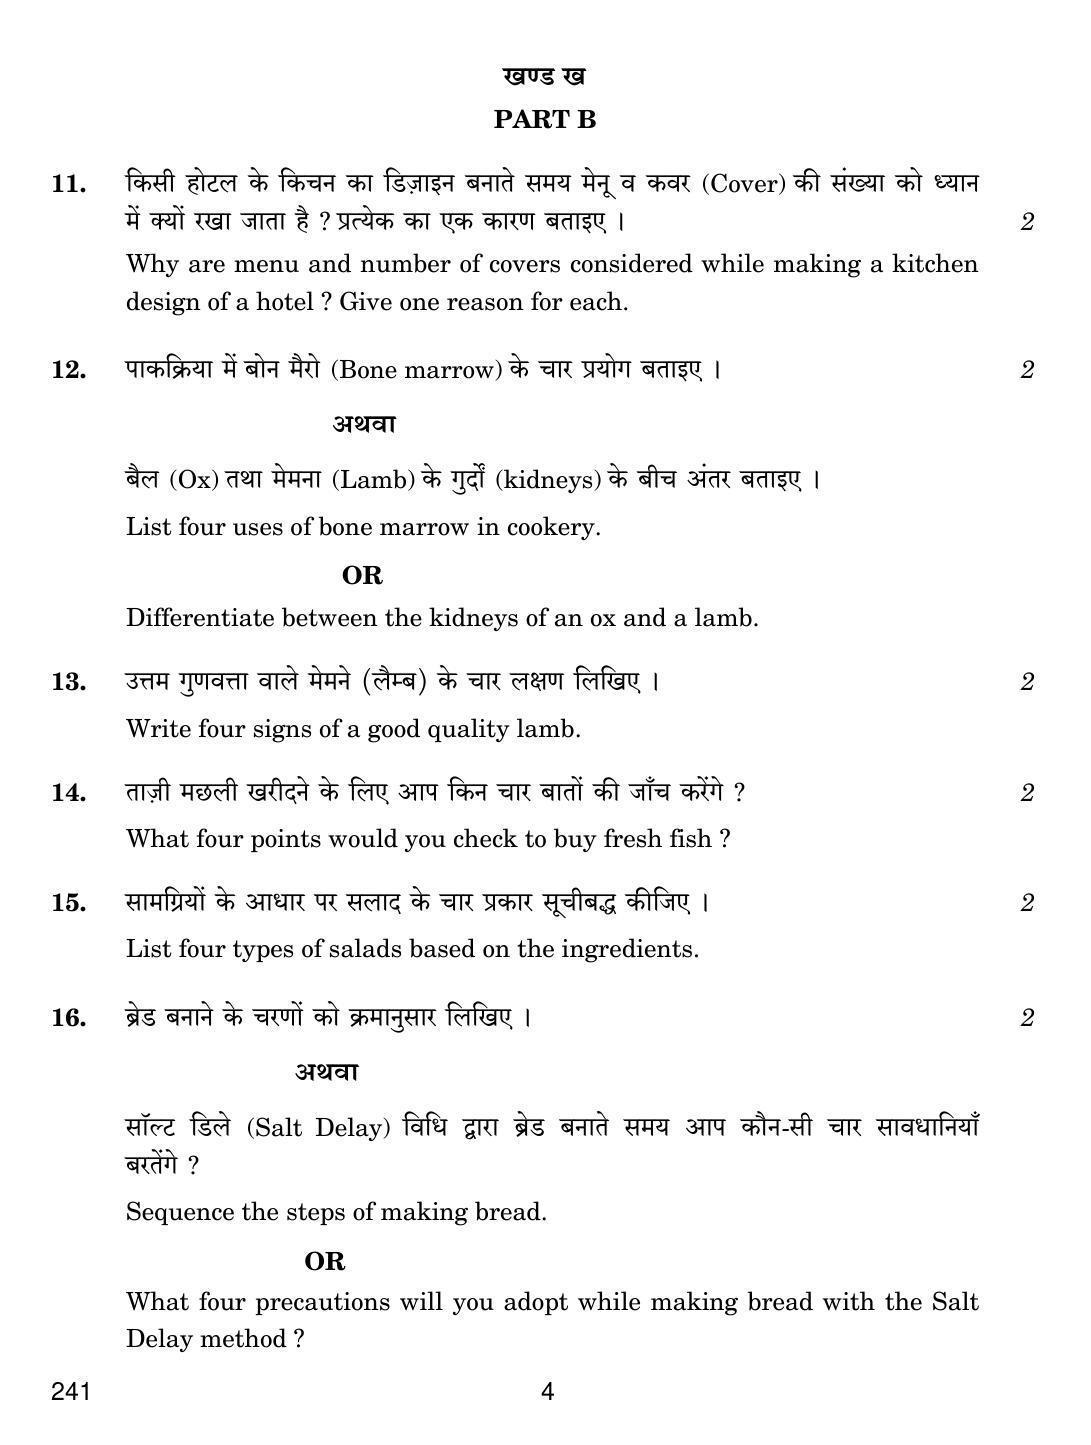 CBSE Class 12 241 FOOD PRODUCTION III 2018 Question Paper - Page 4